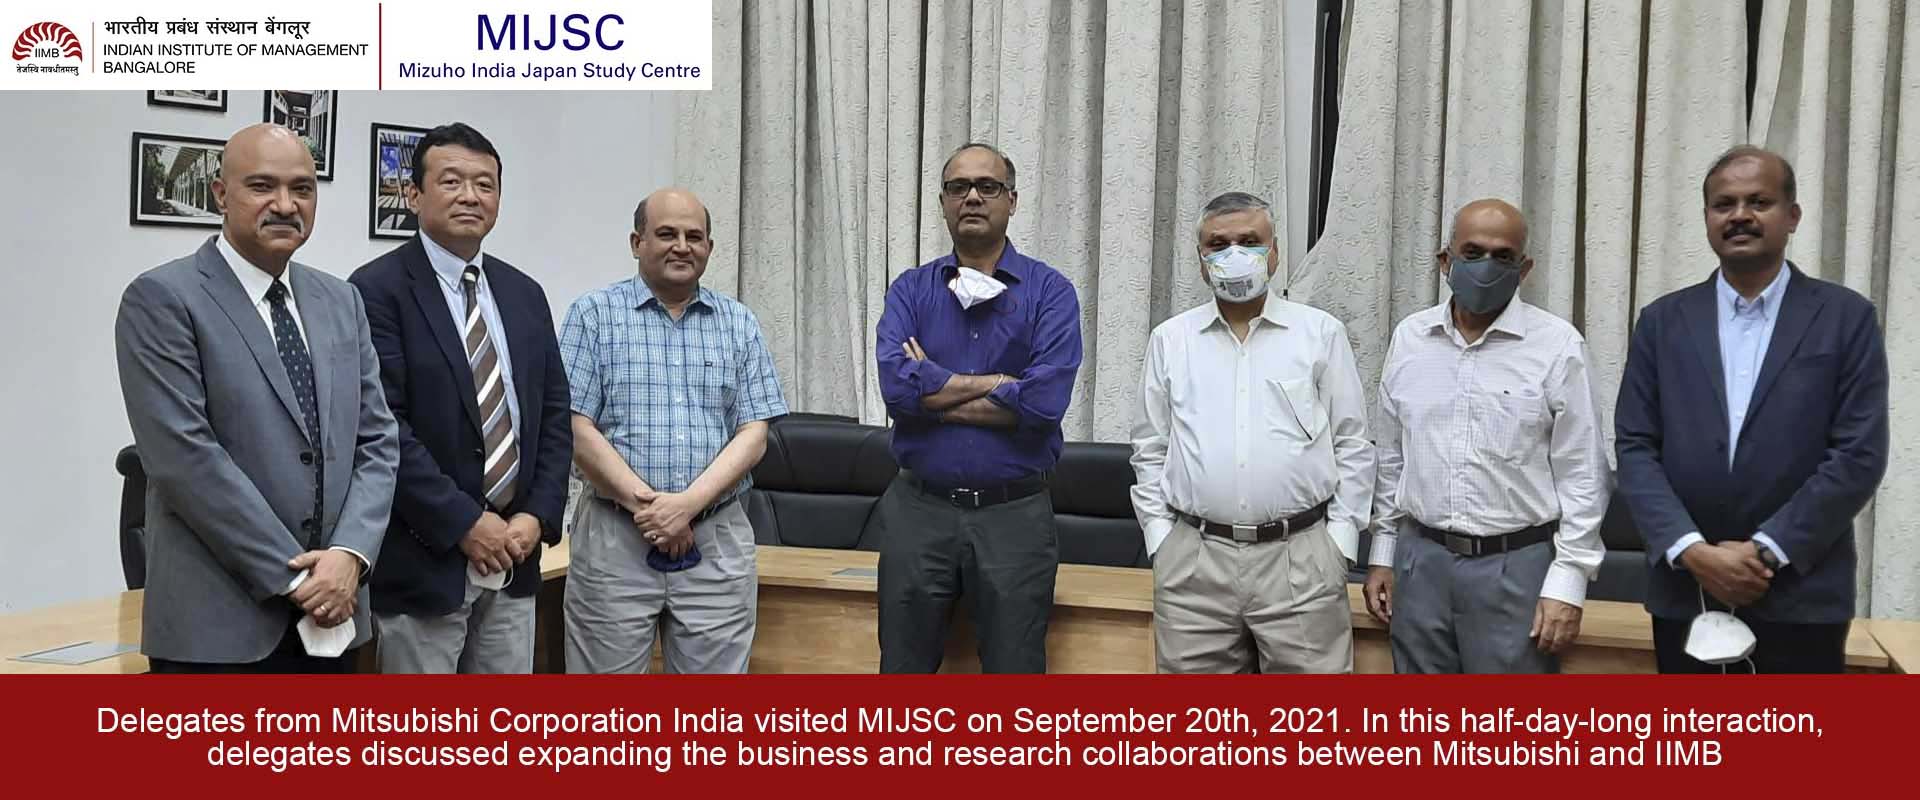 Delegates from Mitsubishi Corporation India visited MIJSC on September 20th, 2021. In this half-day-long interaction, delegates discussed expanding the business and research collaborations between Mitsubishi and IIMB.